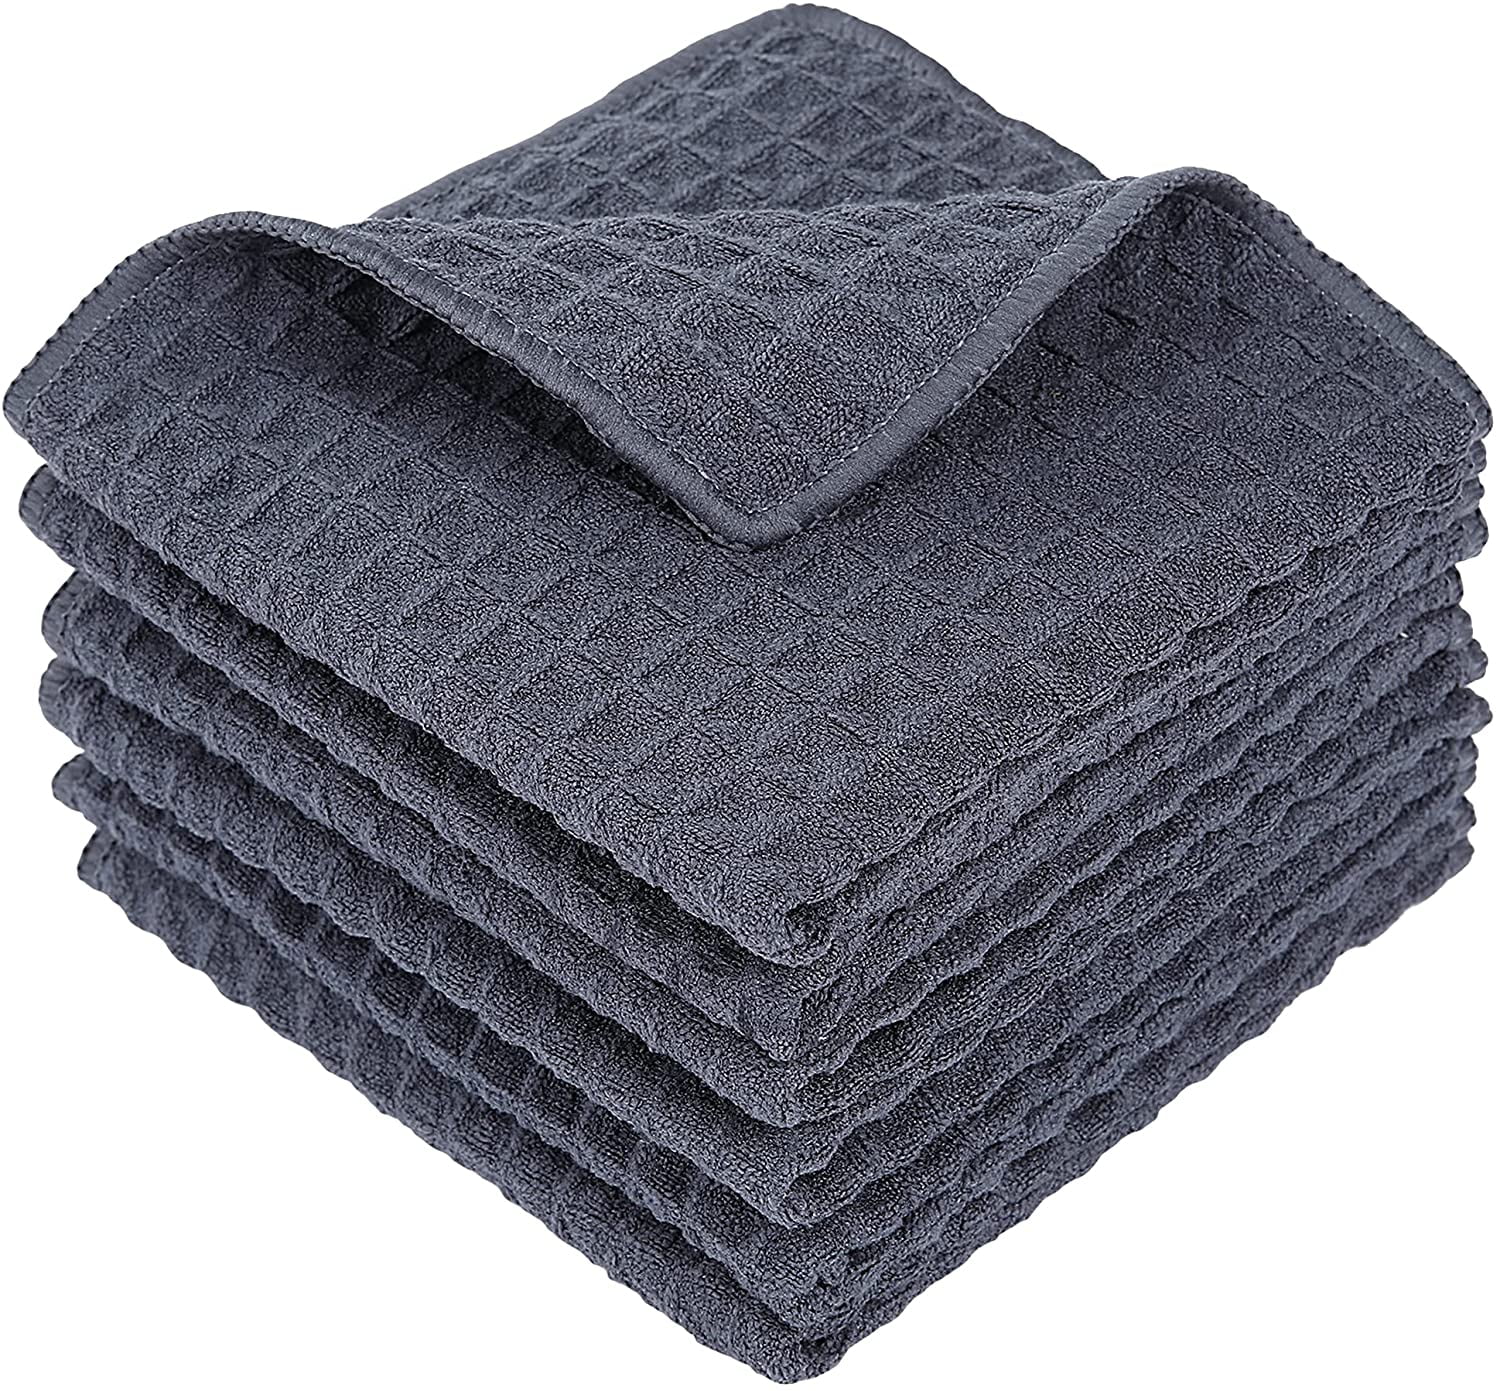 MiasDream Waffle Weave Microfiber Towels Car Drying Towel Absorbent Car Detailing Cleaning Towels Navy Blue Lint Free Car Cleaning Microfiber Towels for Cars 16Inch x 24Inch 3 Pack 